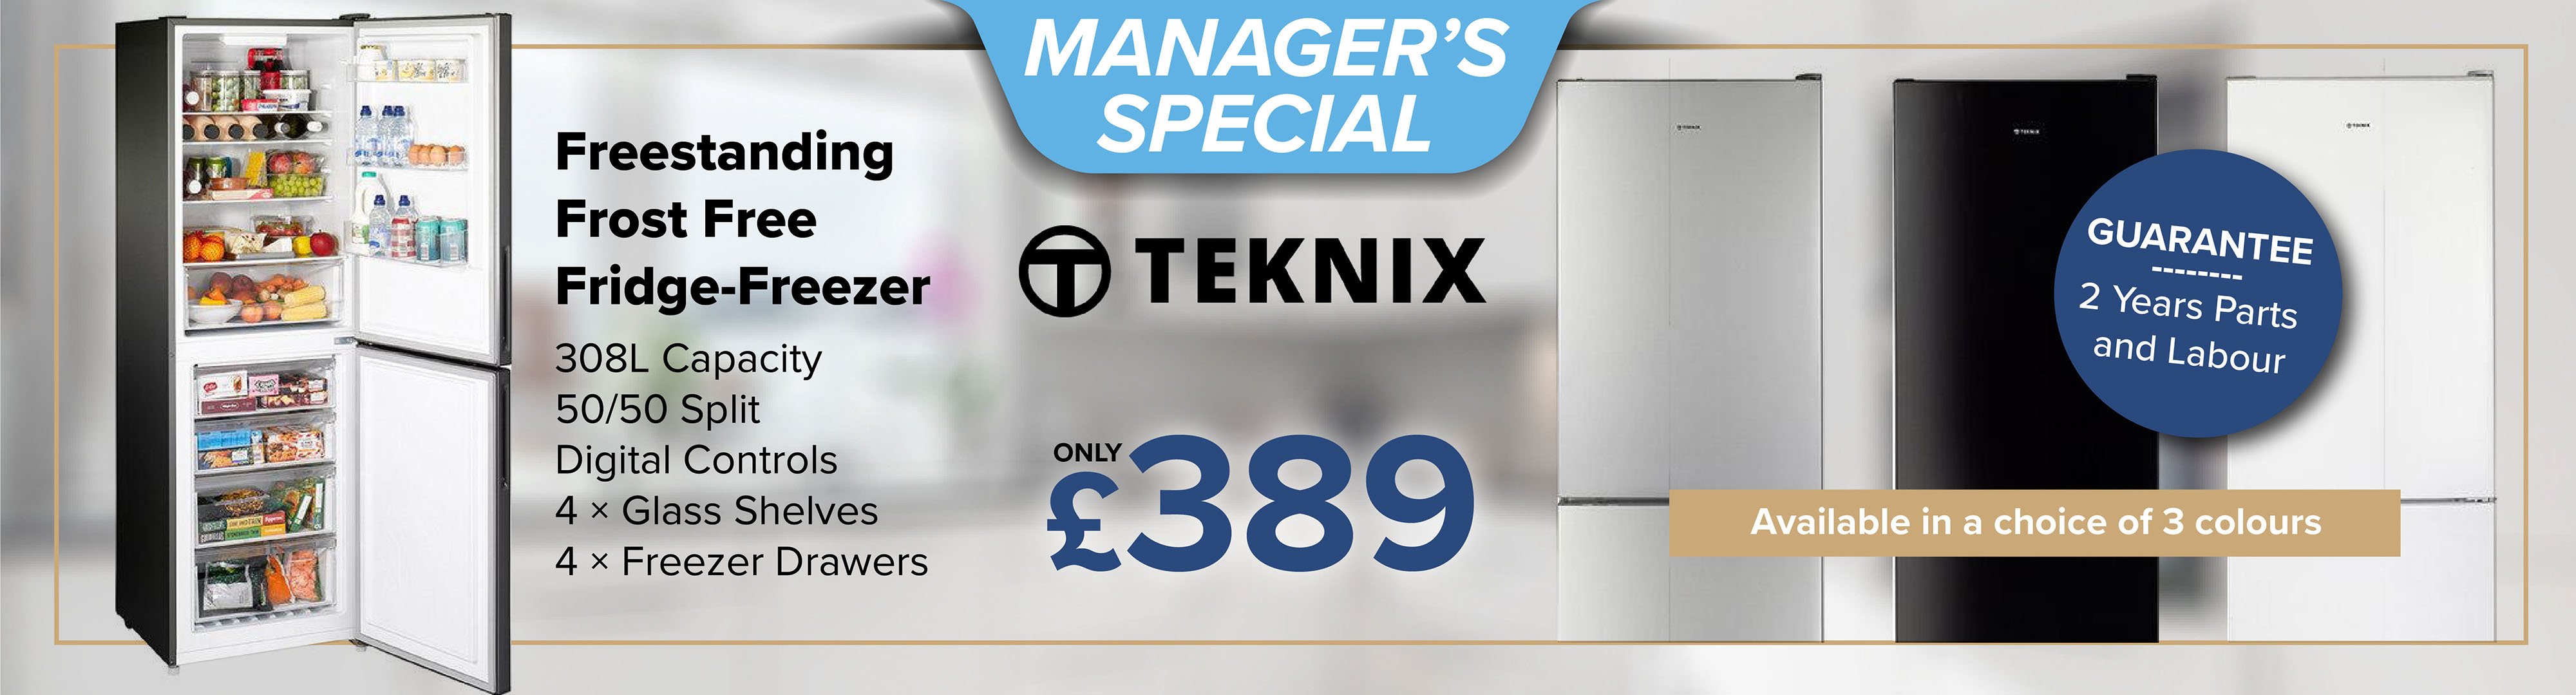 Teknix Freestanding Frost Free Fridge Freezer 50/50 Available in White, Silver and Black £389